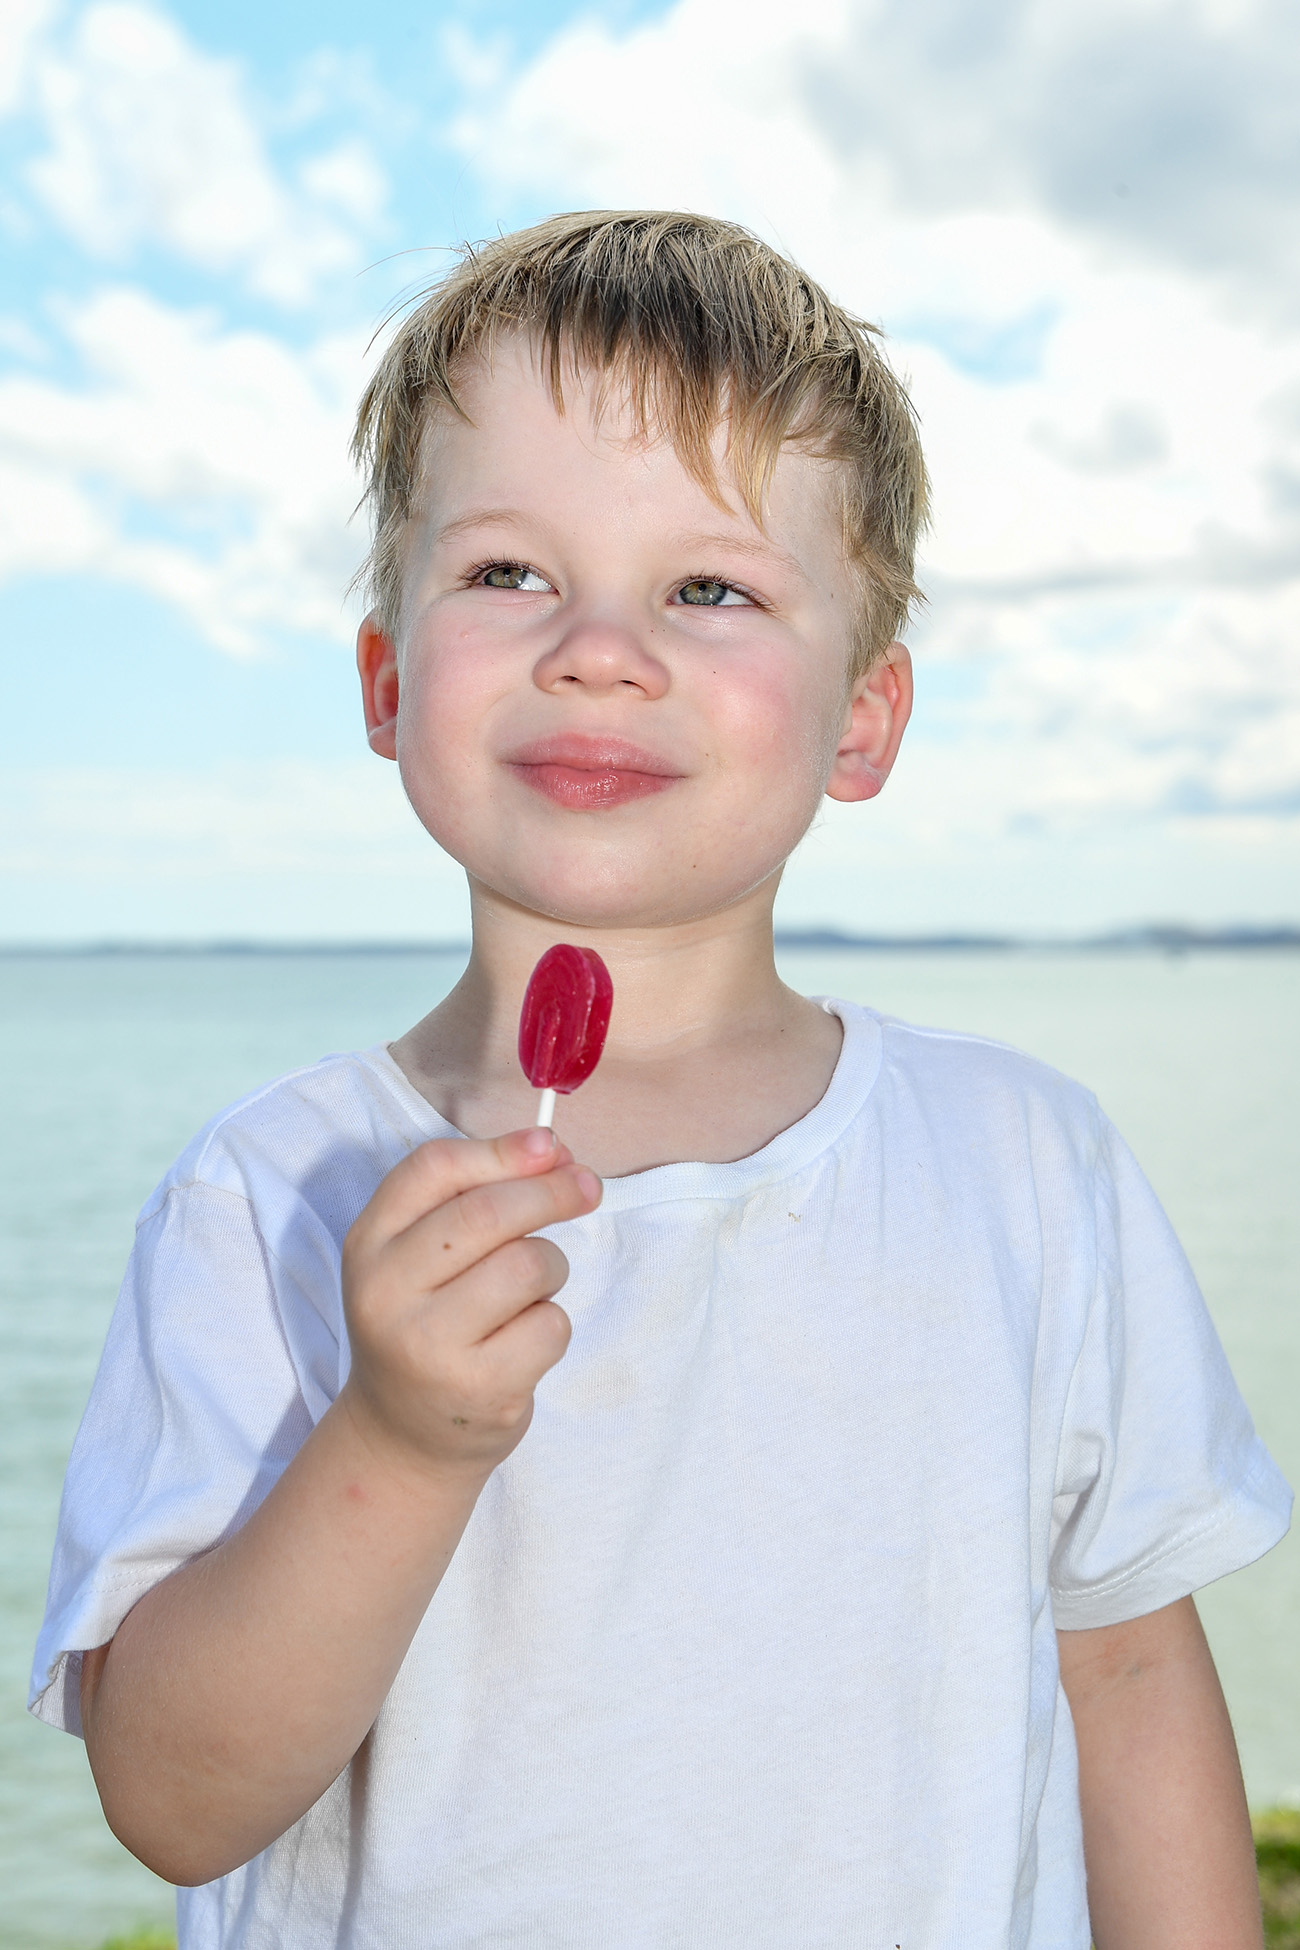 A blonde boy meditates while licking a lollie at the beach